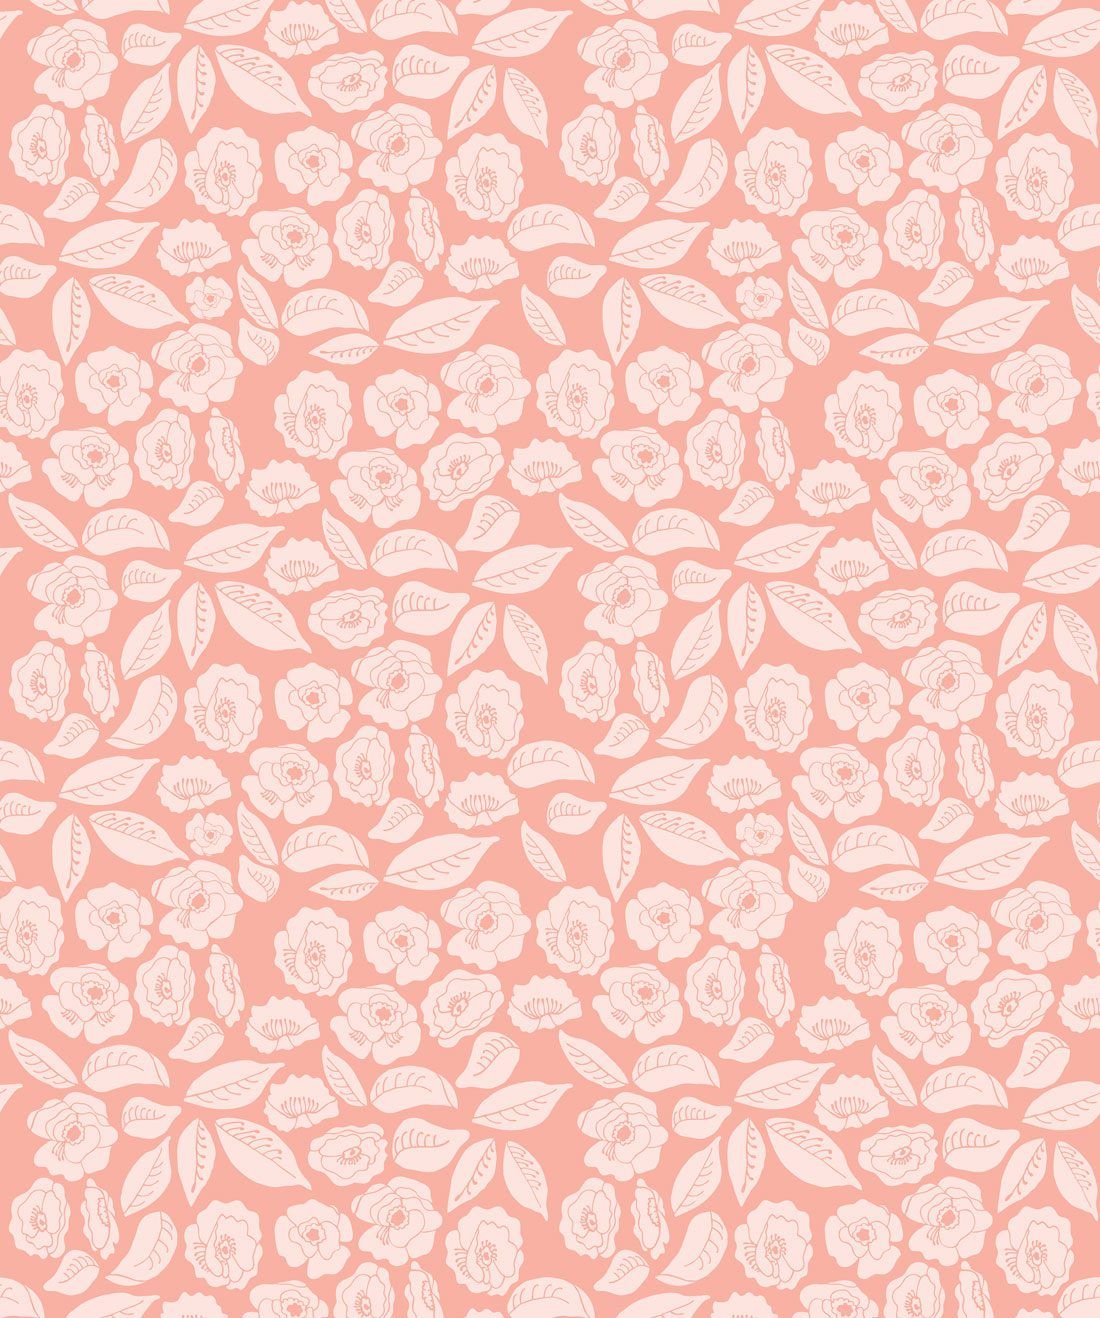 Baby Bloom is a Pink Blossom Wallpaper